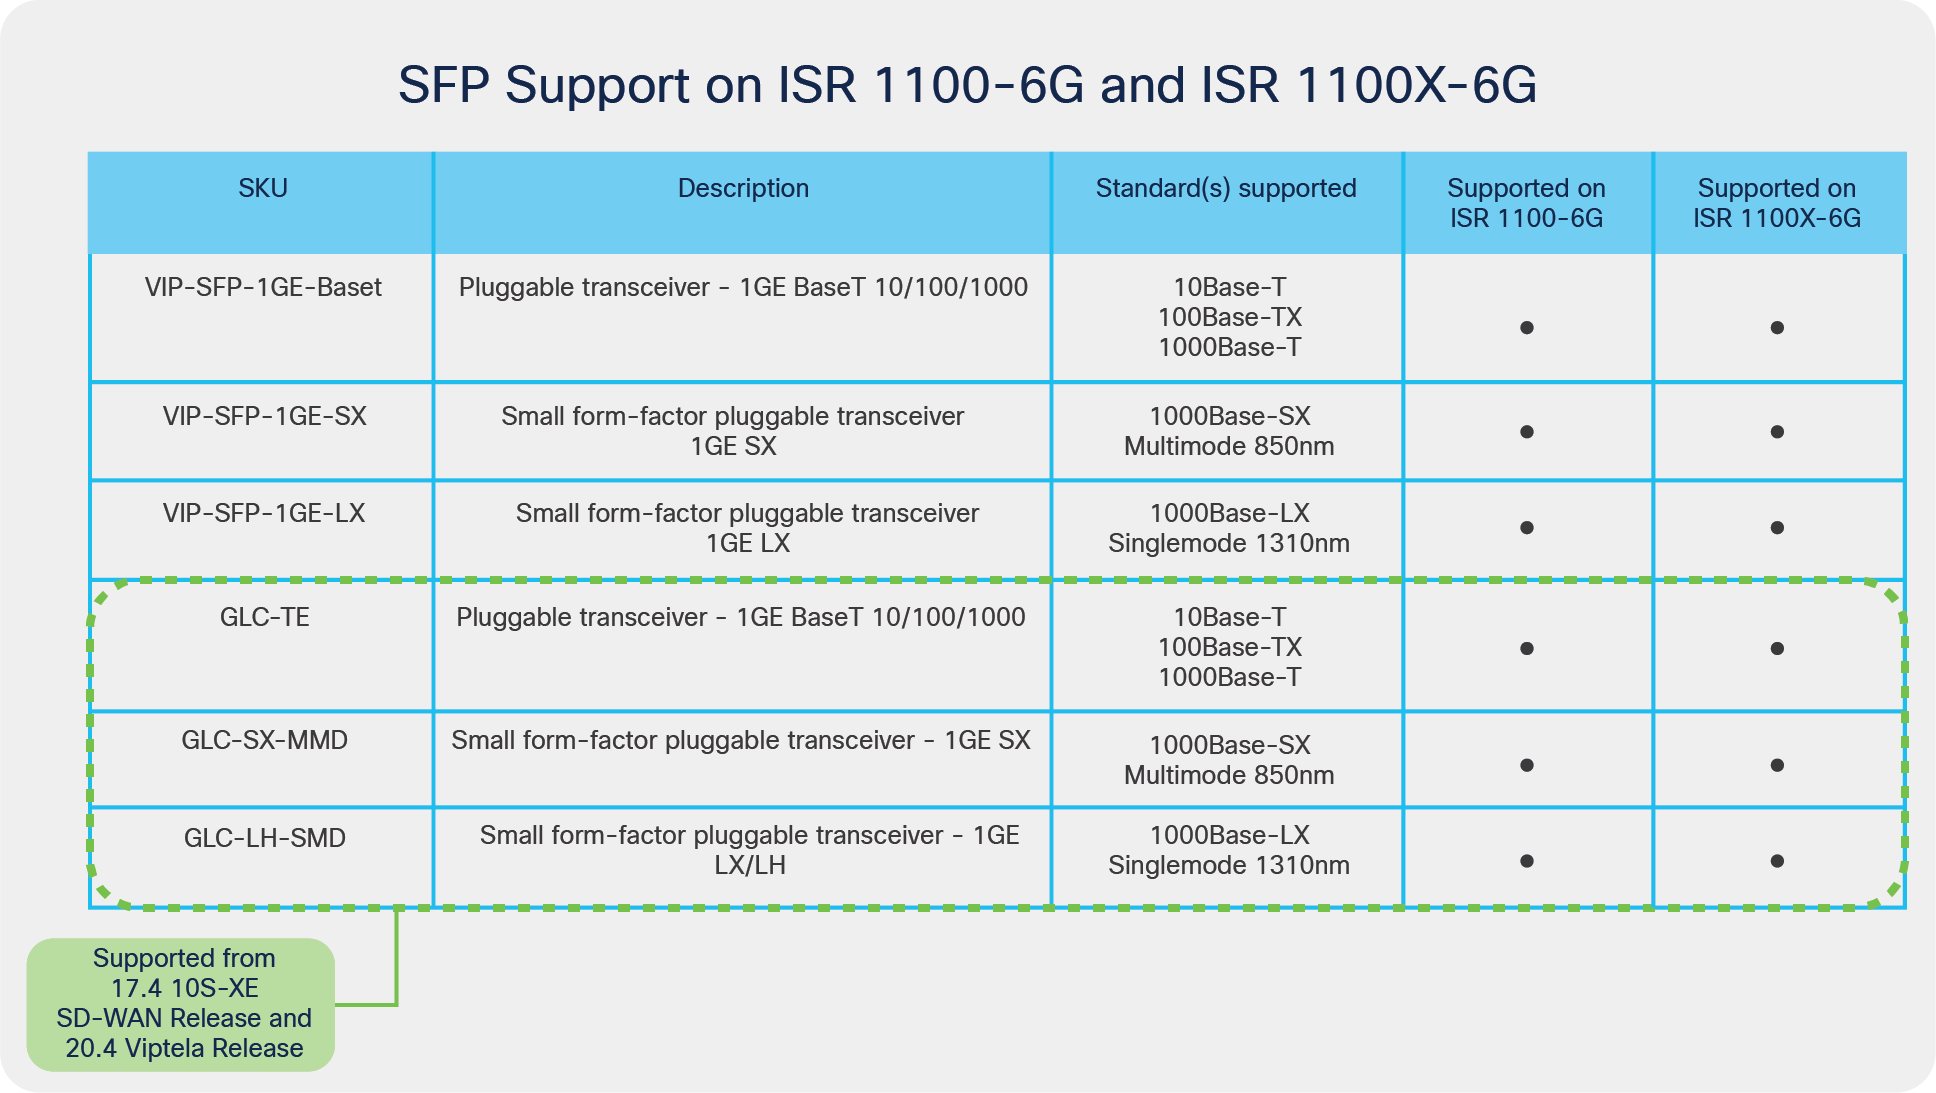 SFP support on the ISR 1100-6G and ISR 1100X-6G